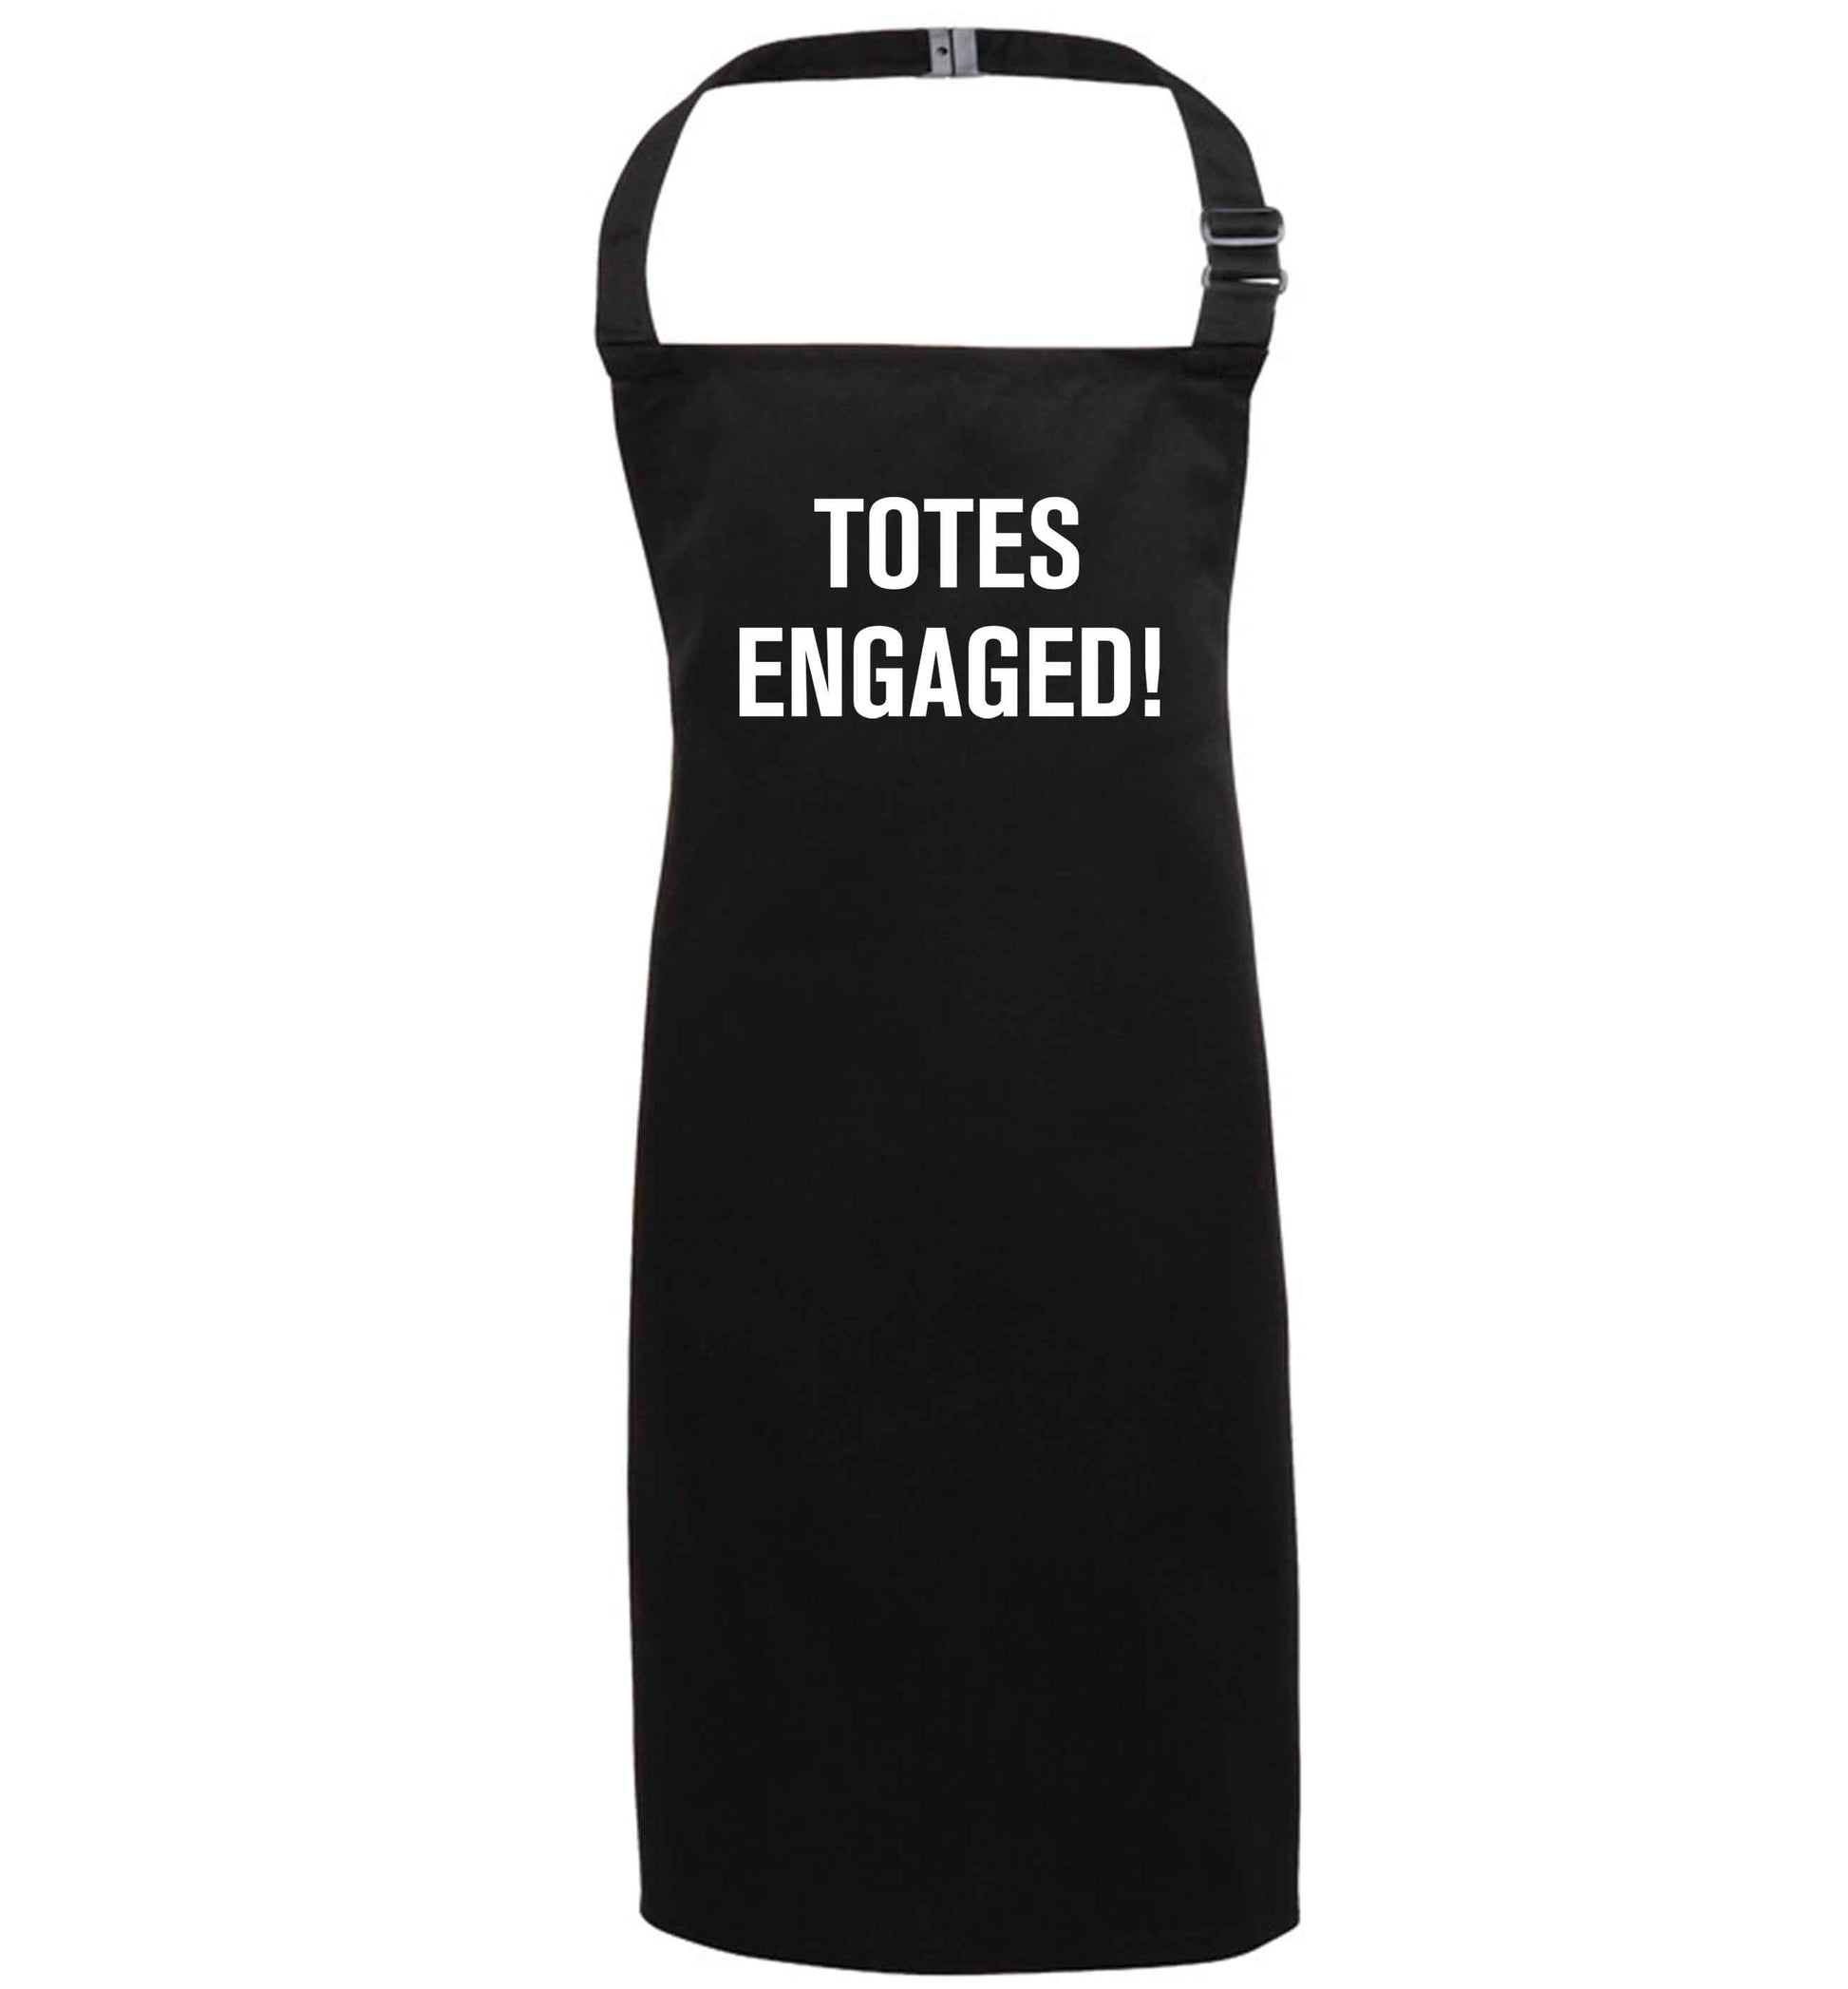 Totes engaged black apron 7-10 years